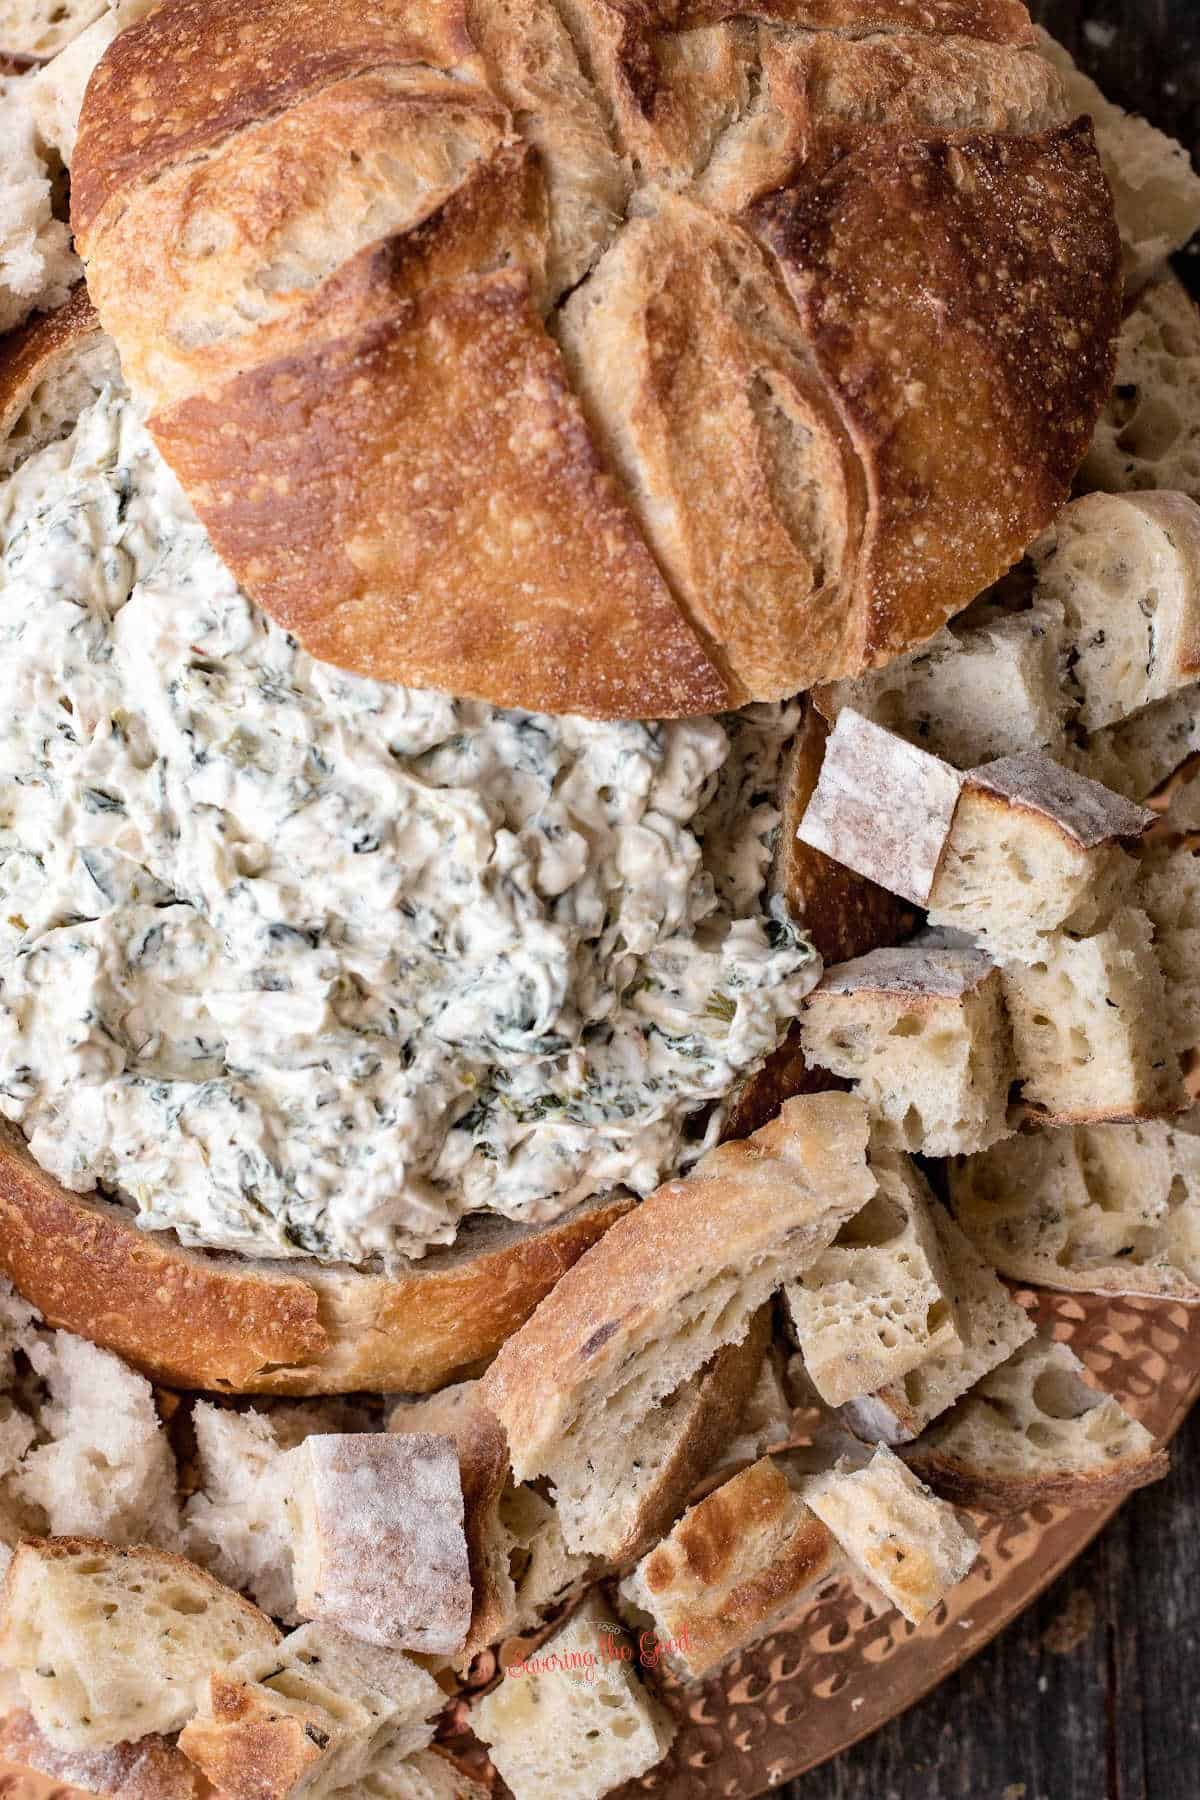 Knorr Spinach Dip in a bread bowl with bread cubes.